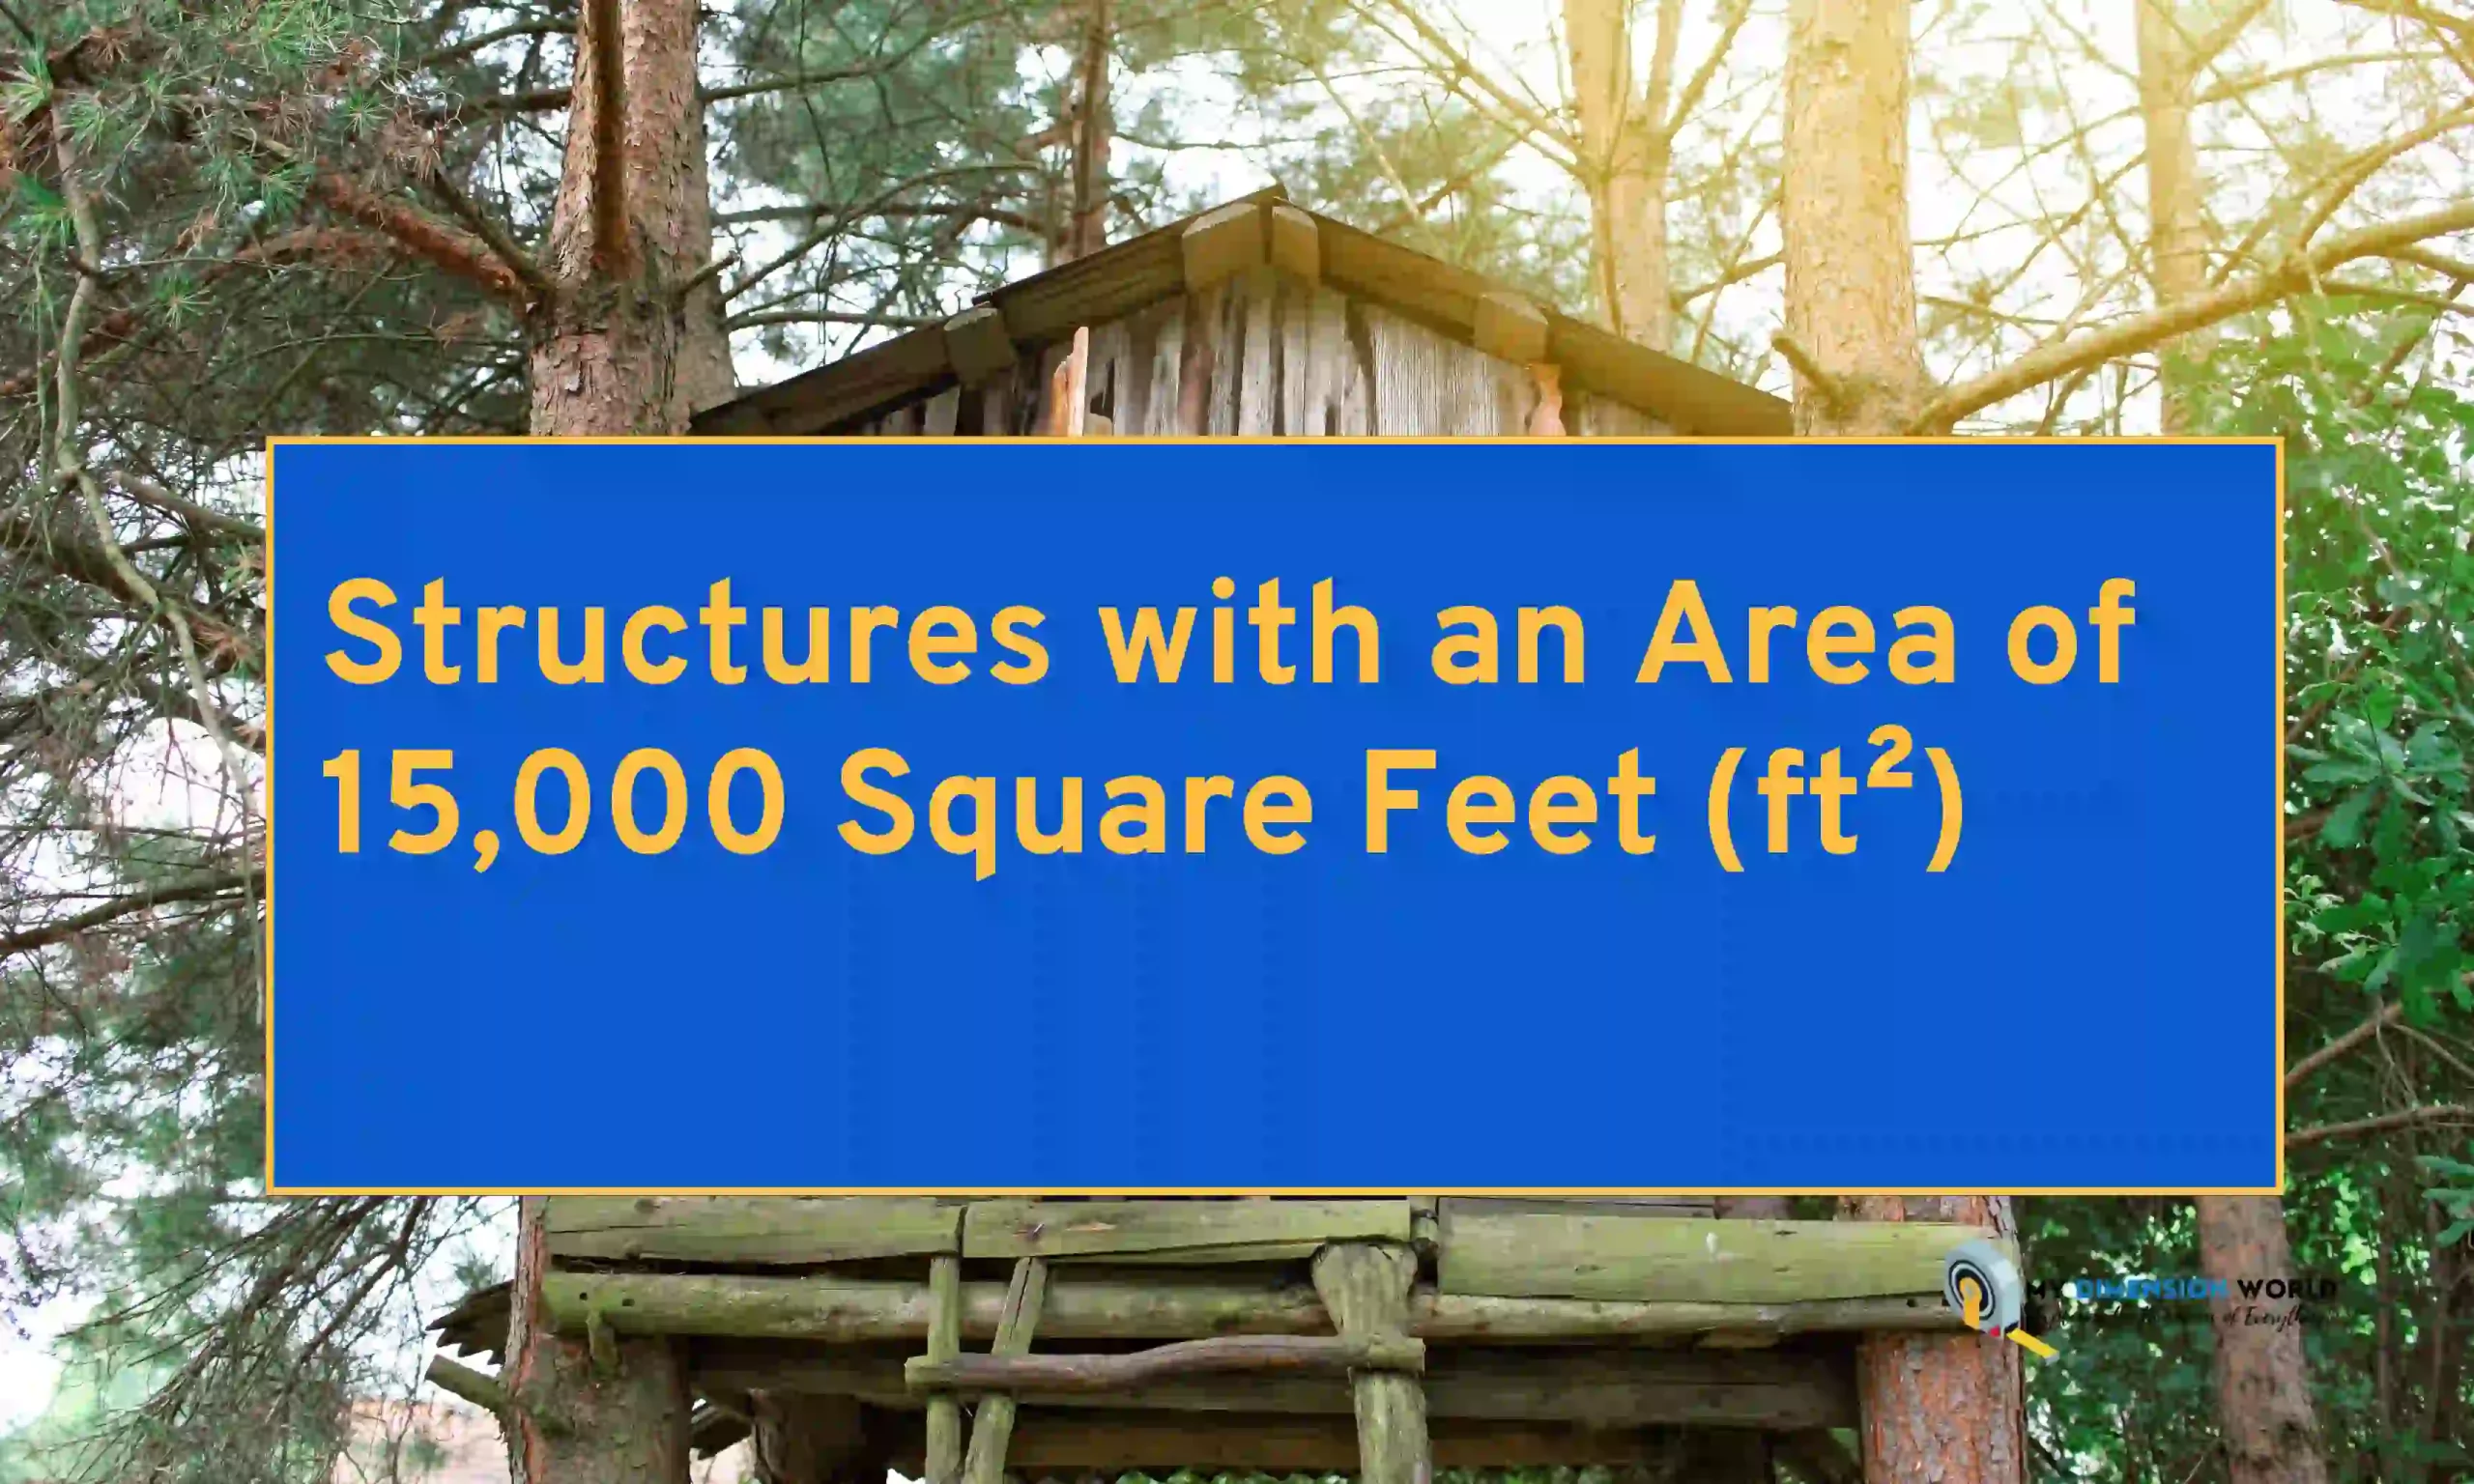 Structures with an Area of 15,000 Square Feet (ft²)